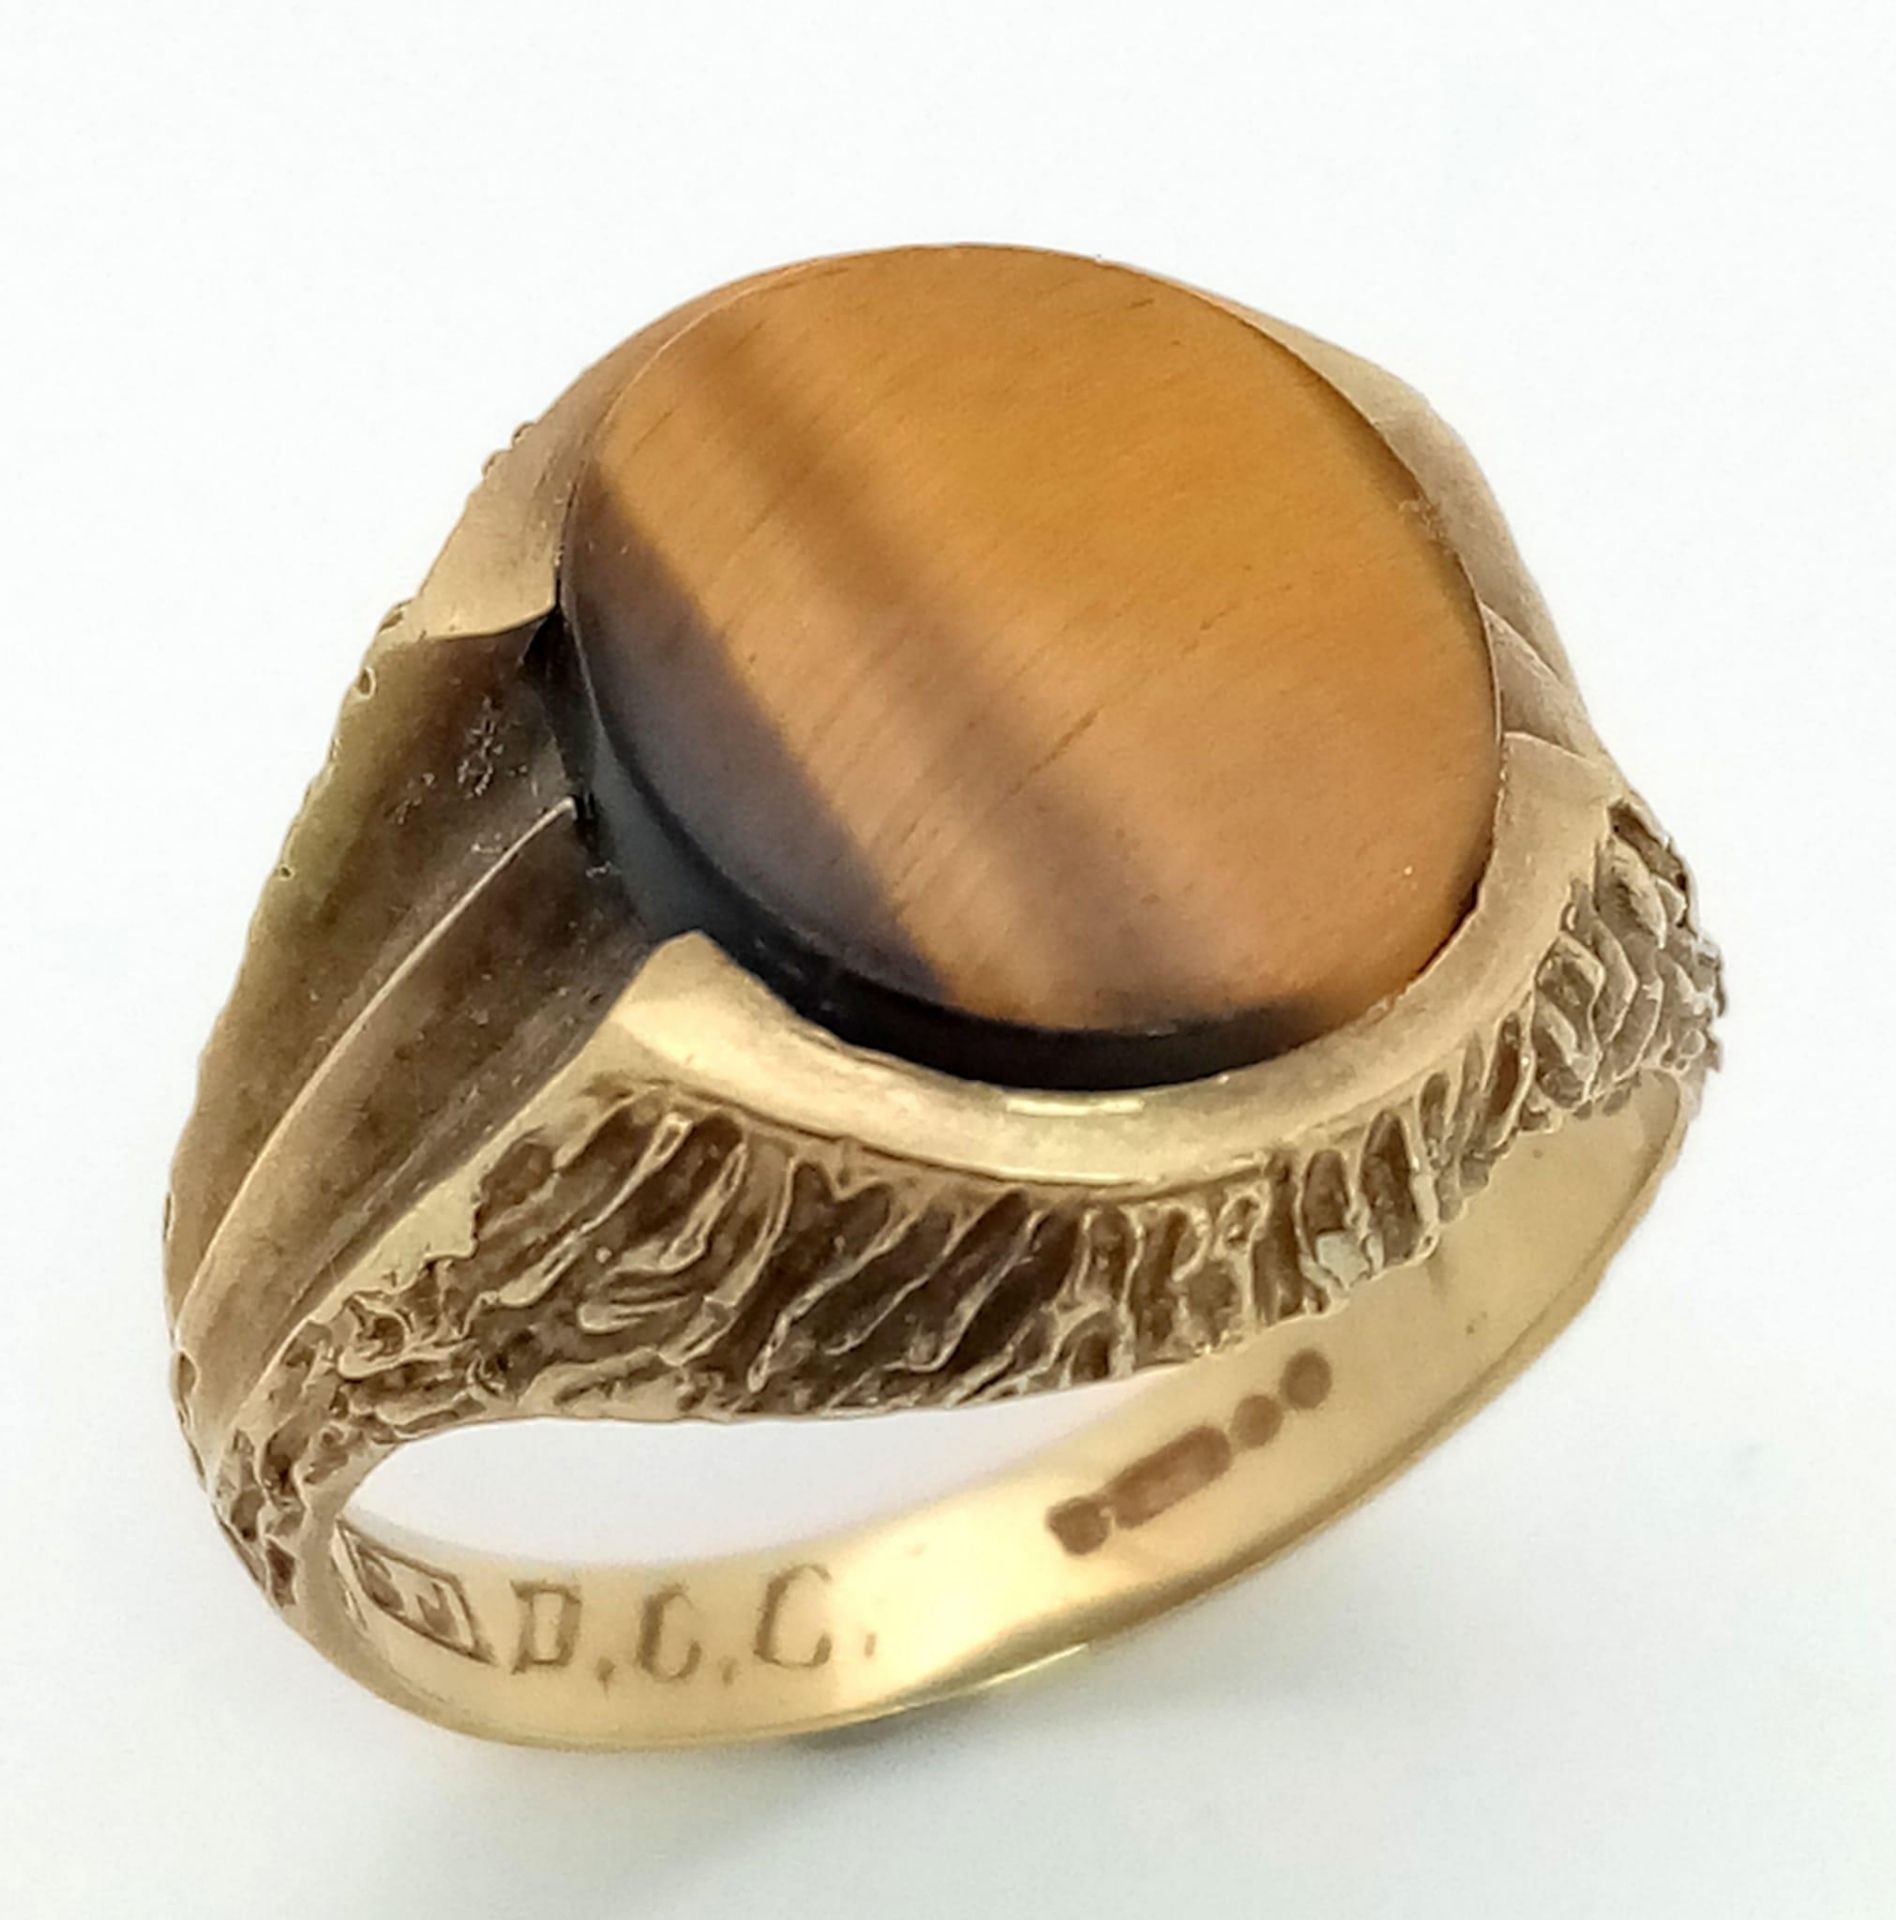 A Vintage Tigers Eye 9K Yellow Gold Ring. Tigers eye cabochon with bark effect decoration. Size S. - Bild 3 aus 4